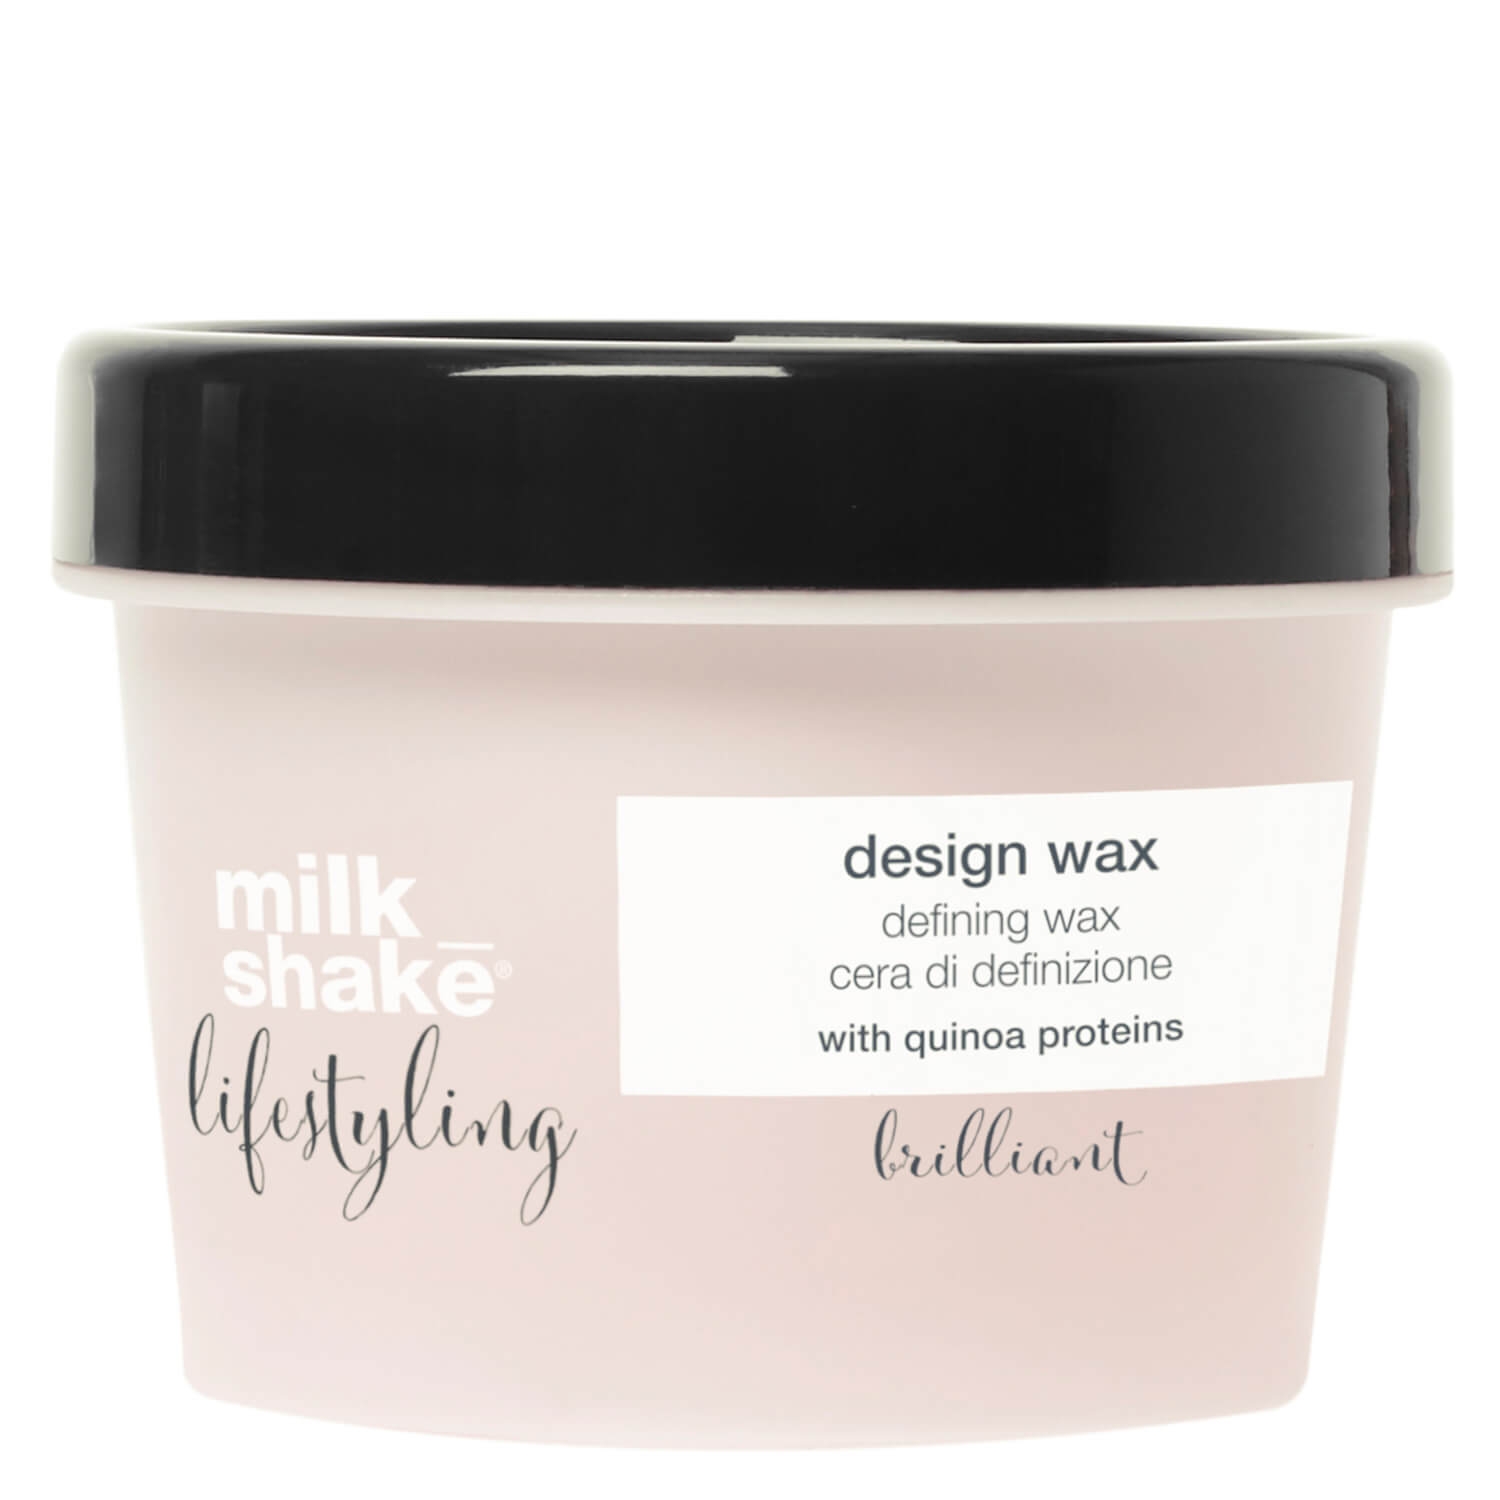 Product image from milk_shake lifestyling - design wax